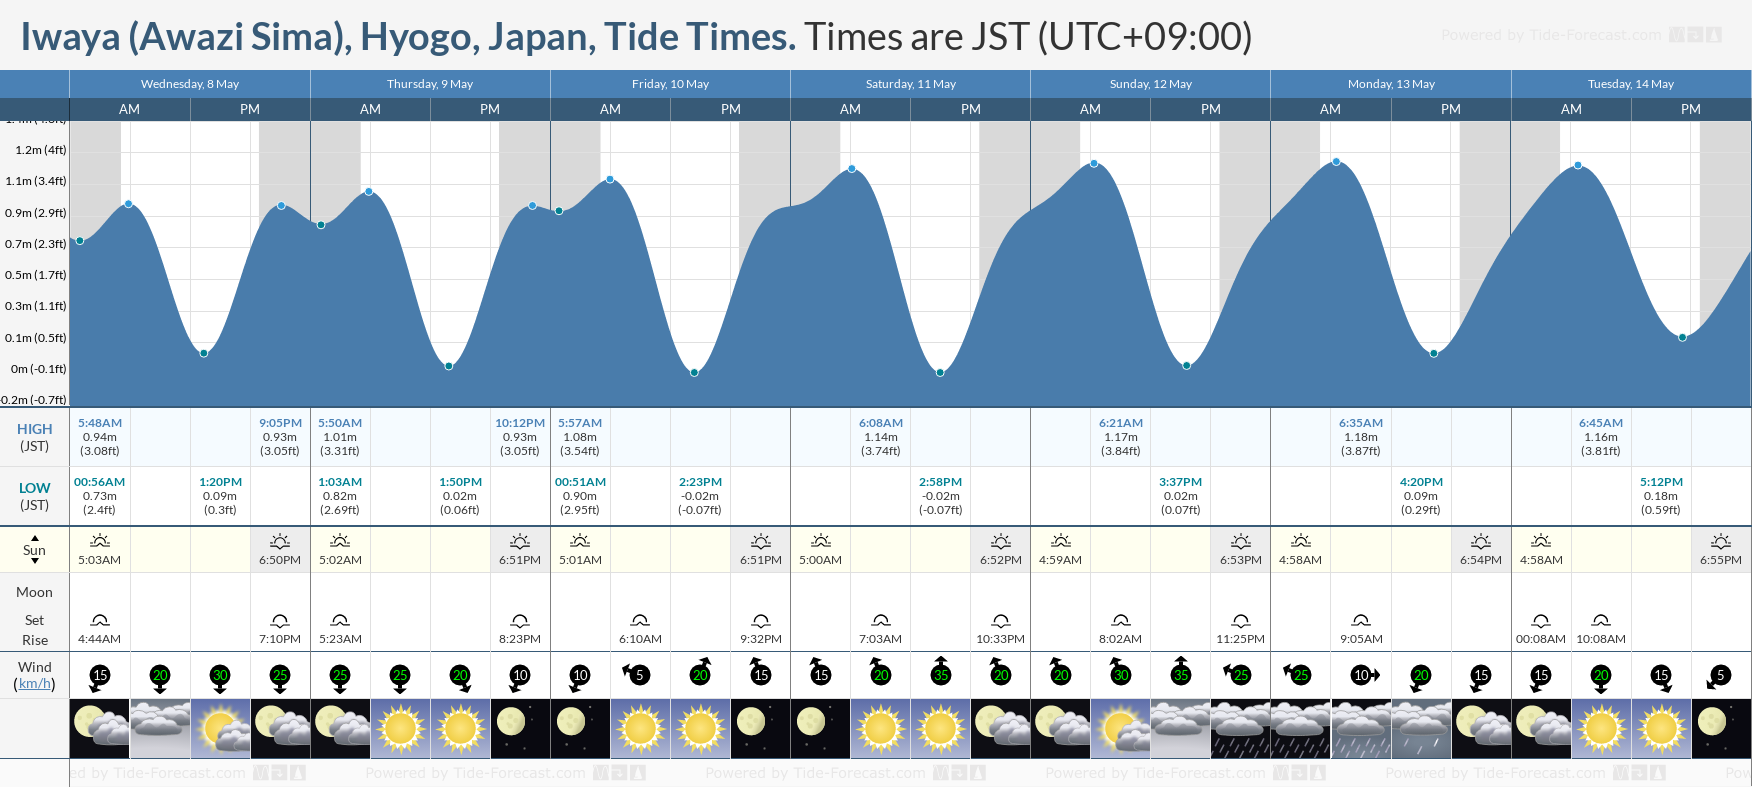 Iwaya (Awazi Sima), Hyogo, Japan Tide Chart including high and low tide tide times for the next 7 days